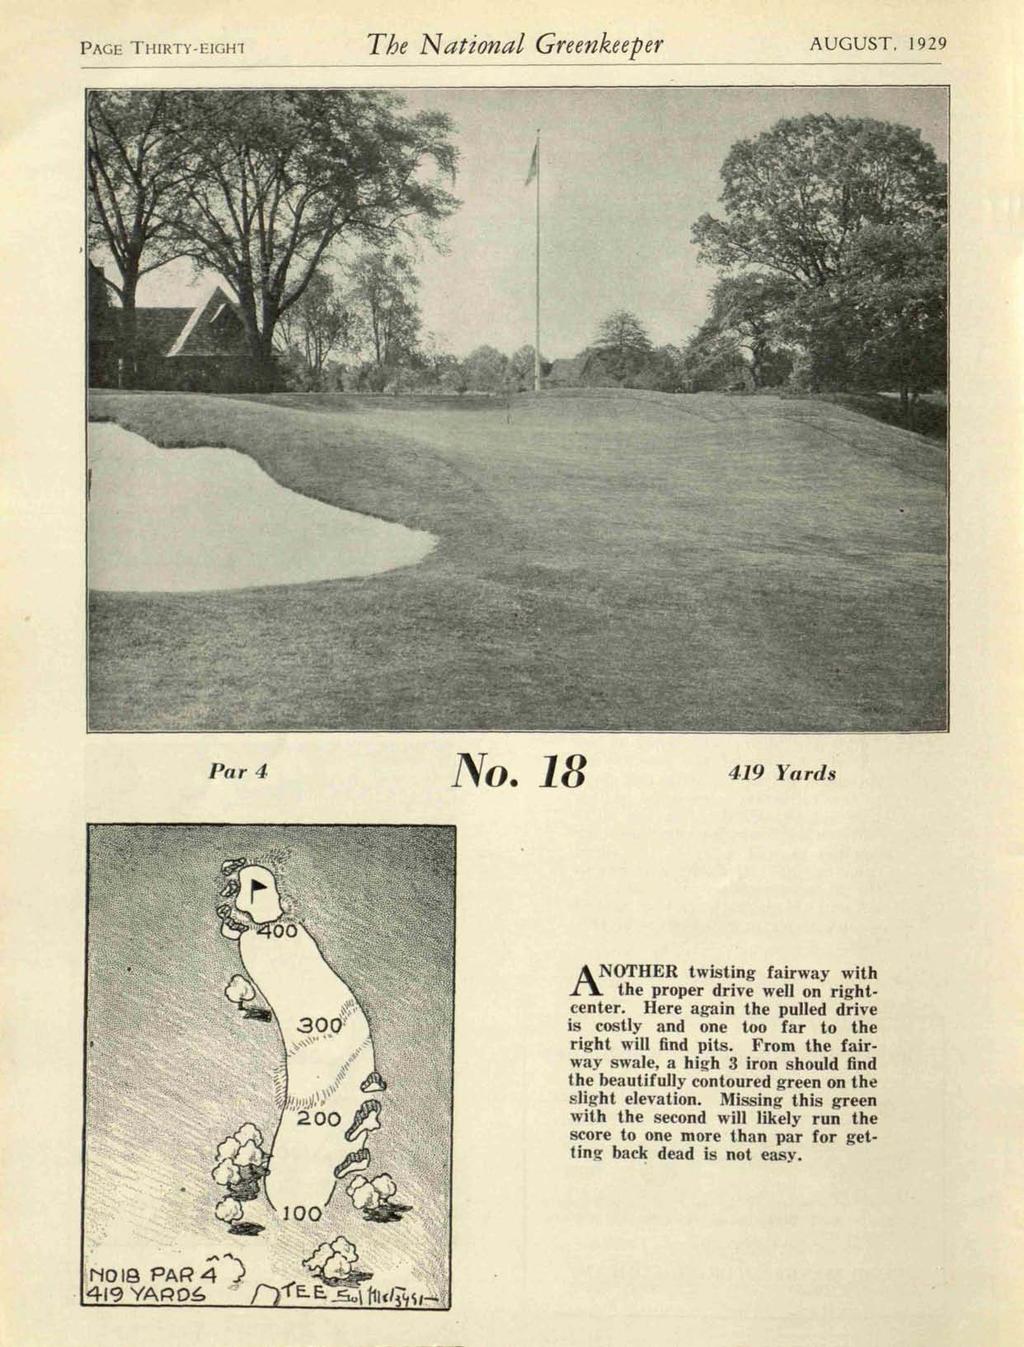 PAGE THIRTY~EIGHl The National Greenkeeper AUGUST, 1929 Par 4 No. 18 419 Yards A NOTHER twisting fairway with I1 the proper drive well on rightcenter.